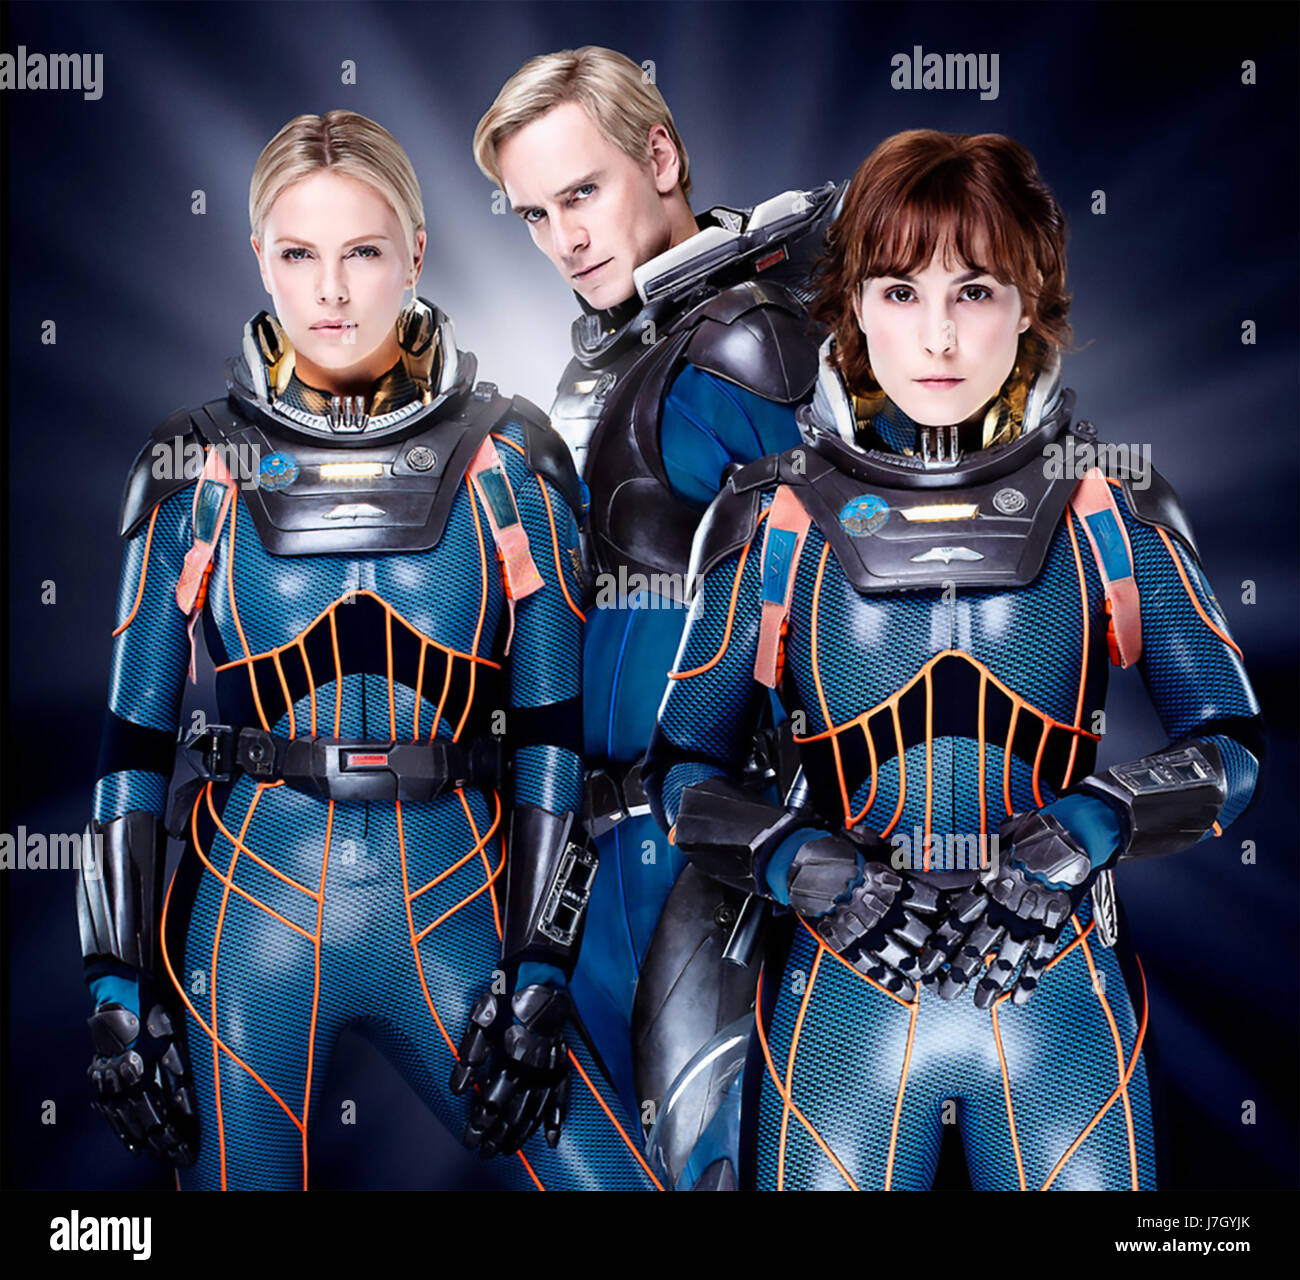 PROMETHEUS 2012 Twentieth Century Fox film with from left: Charlize Theron, Michael Fassbender, Noomi Rapace Stock Photo